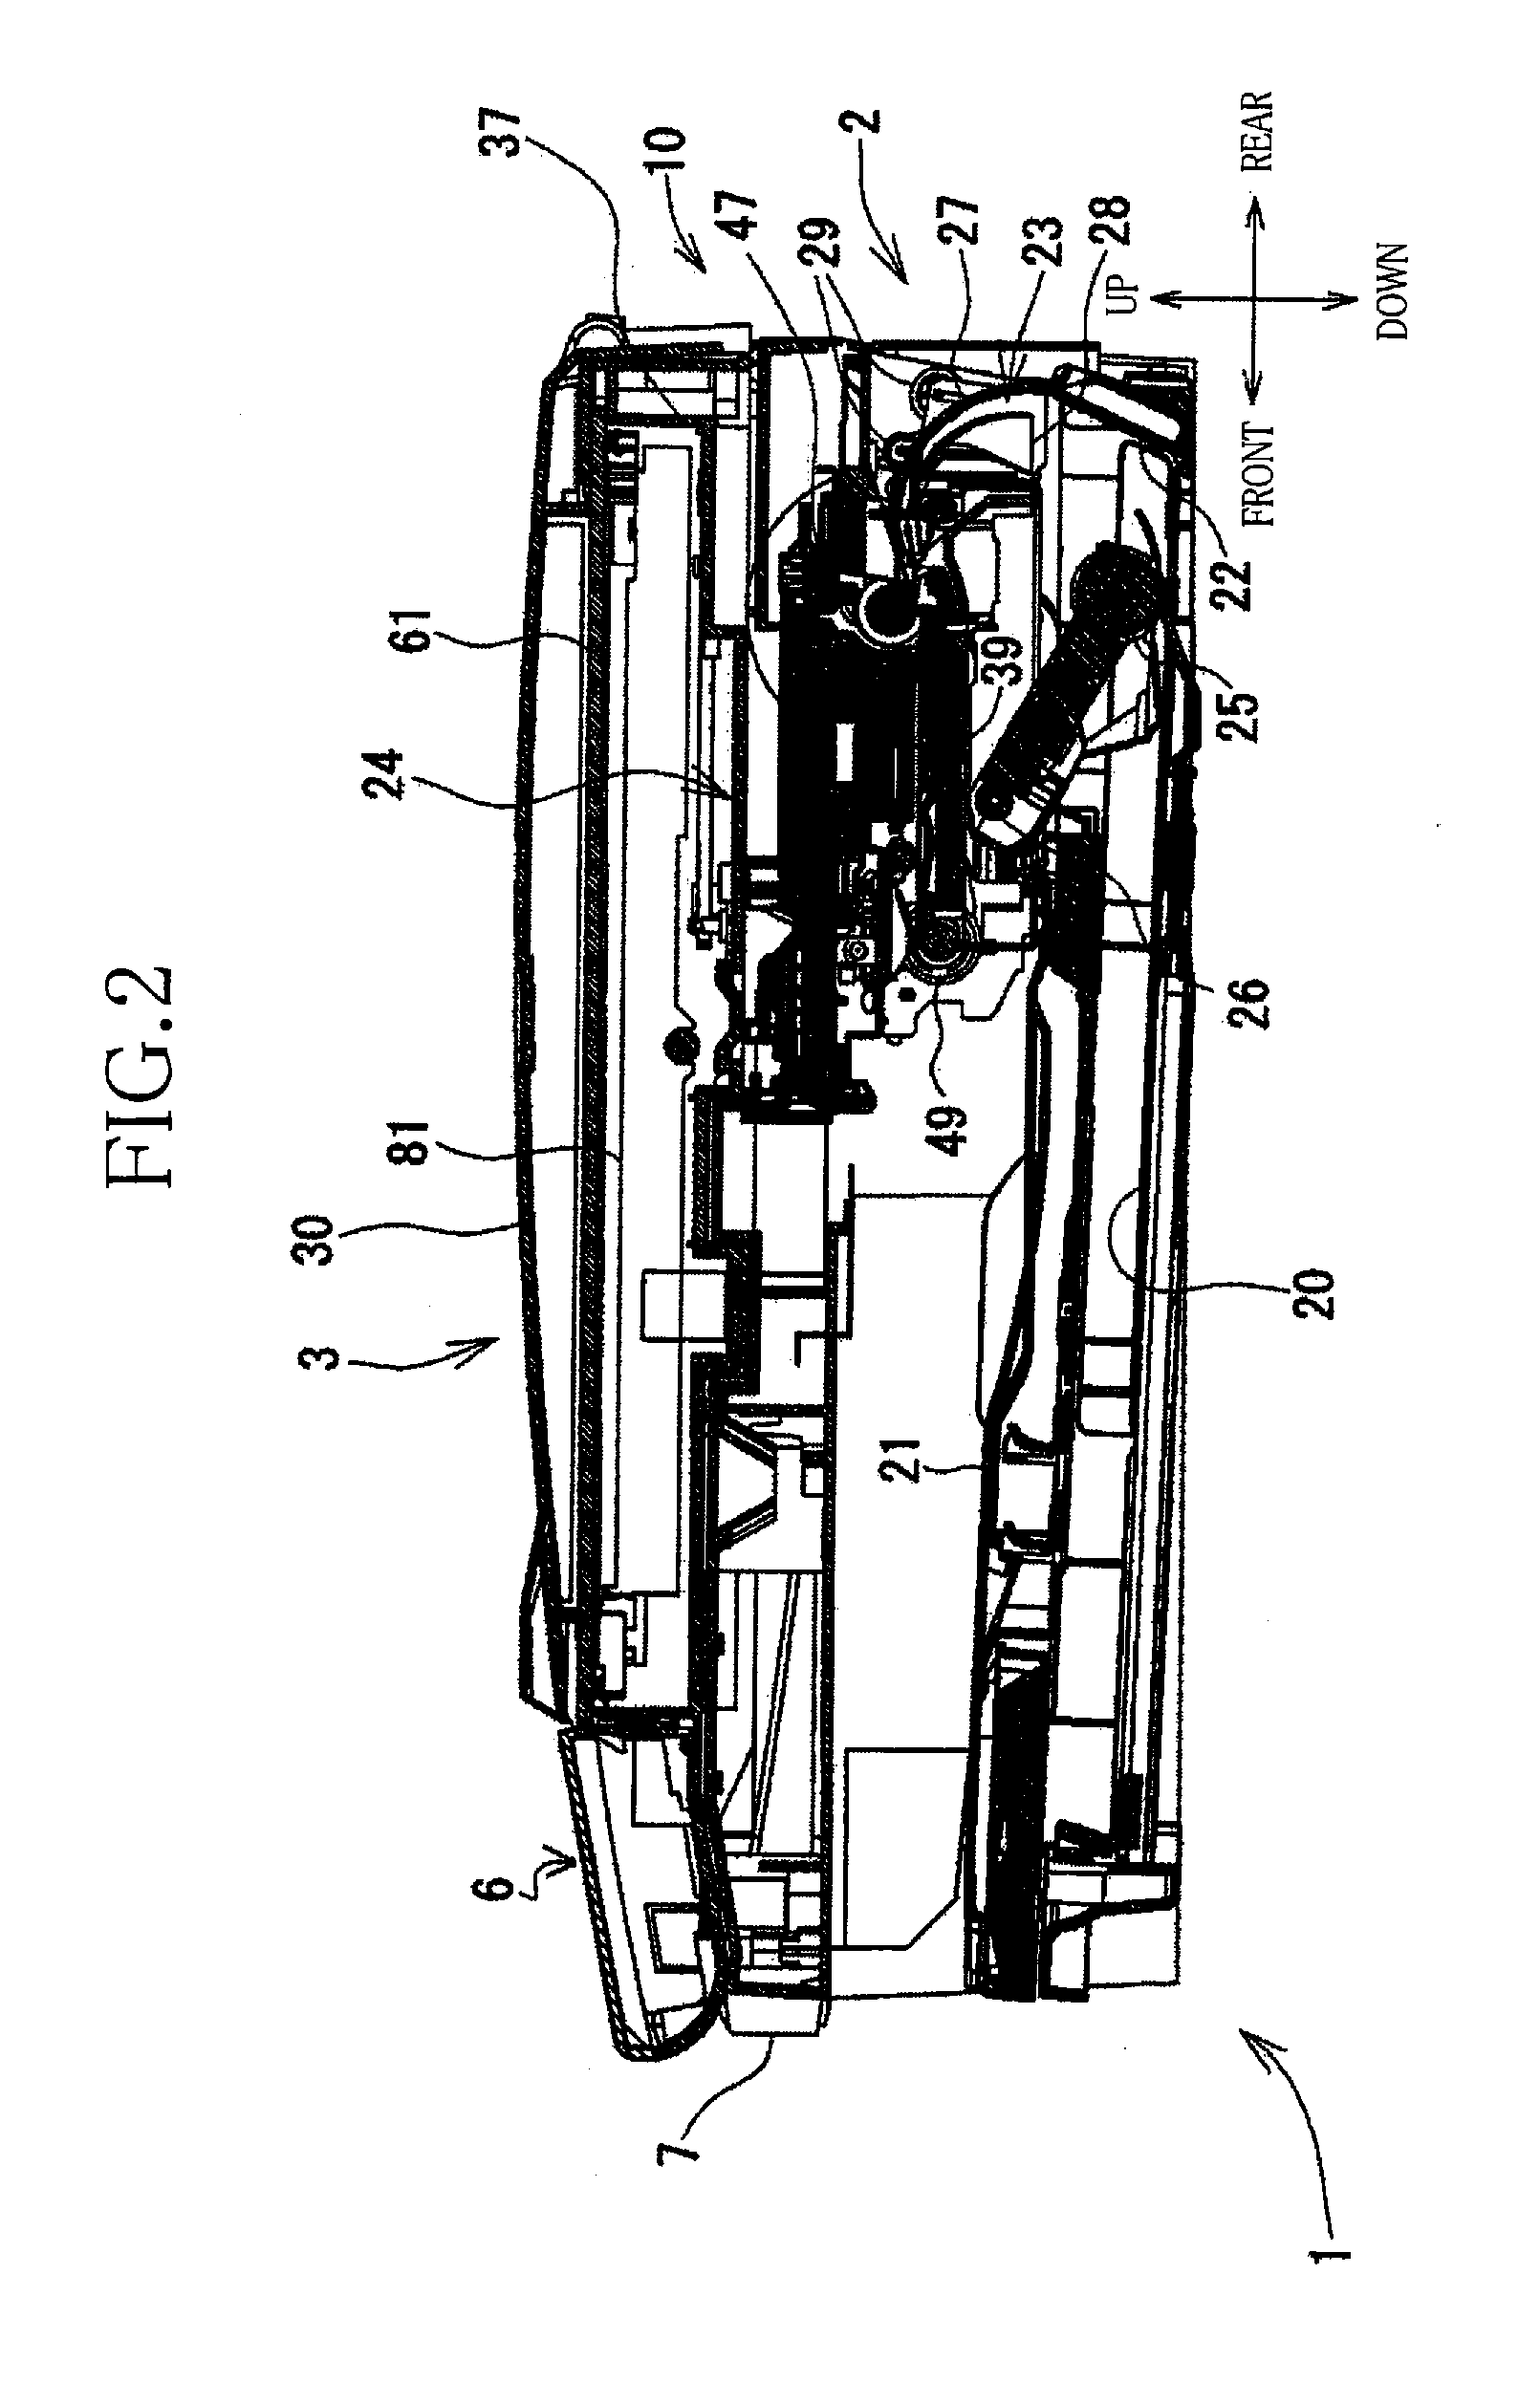 Opening and closing assembly, and multifunction device including the assembly